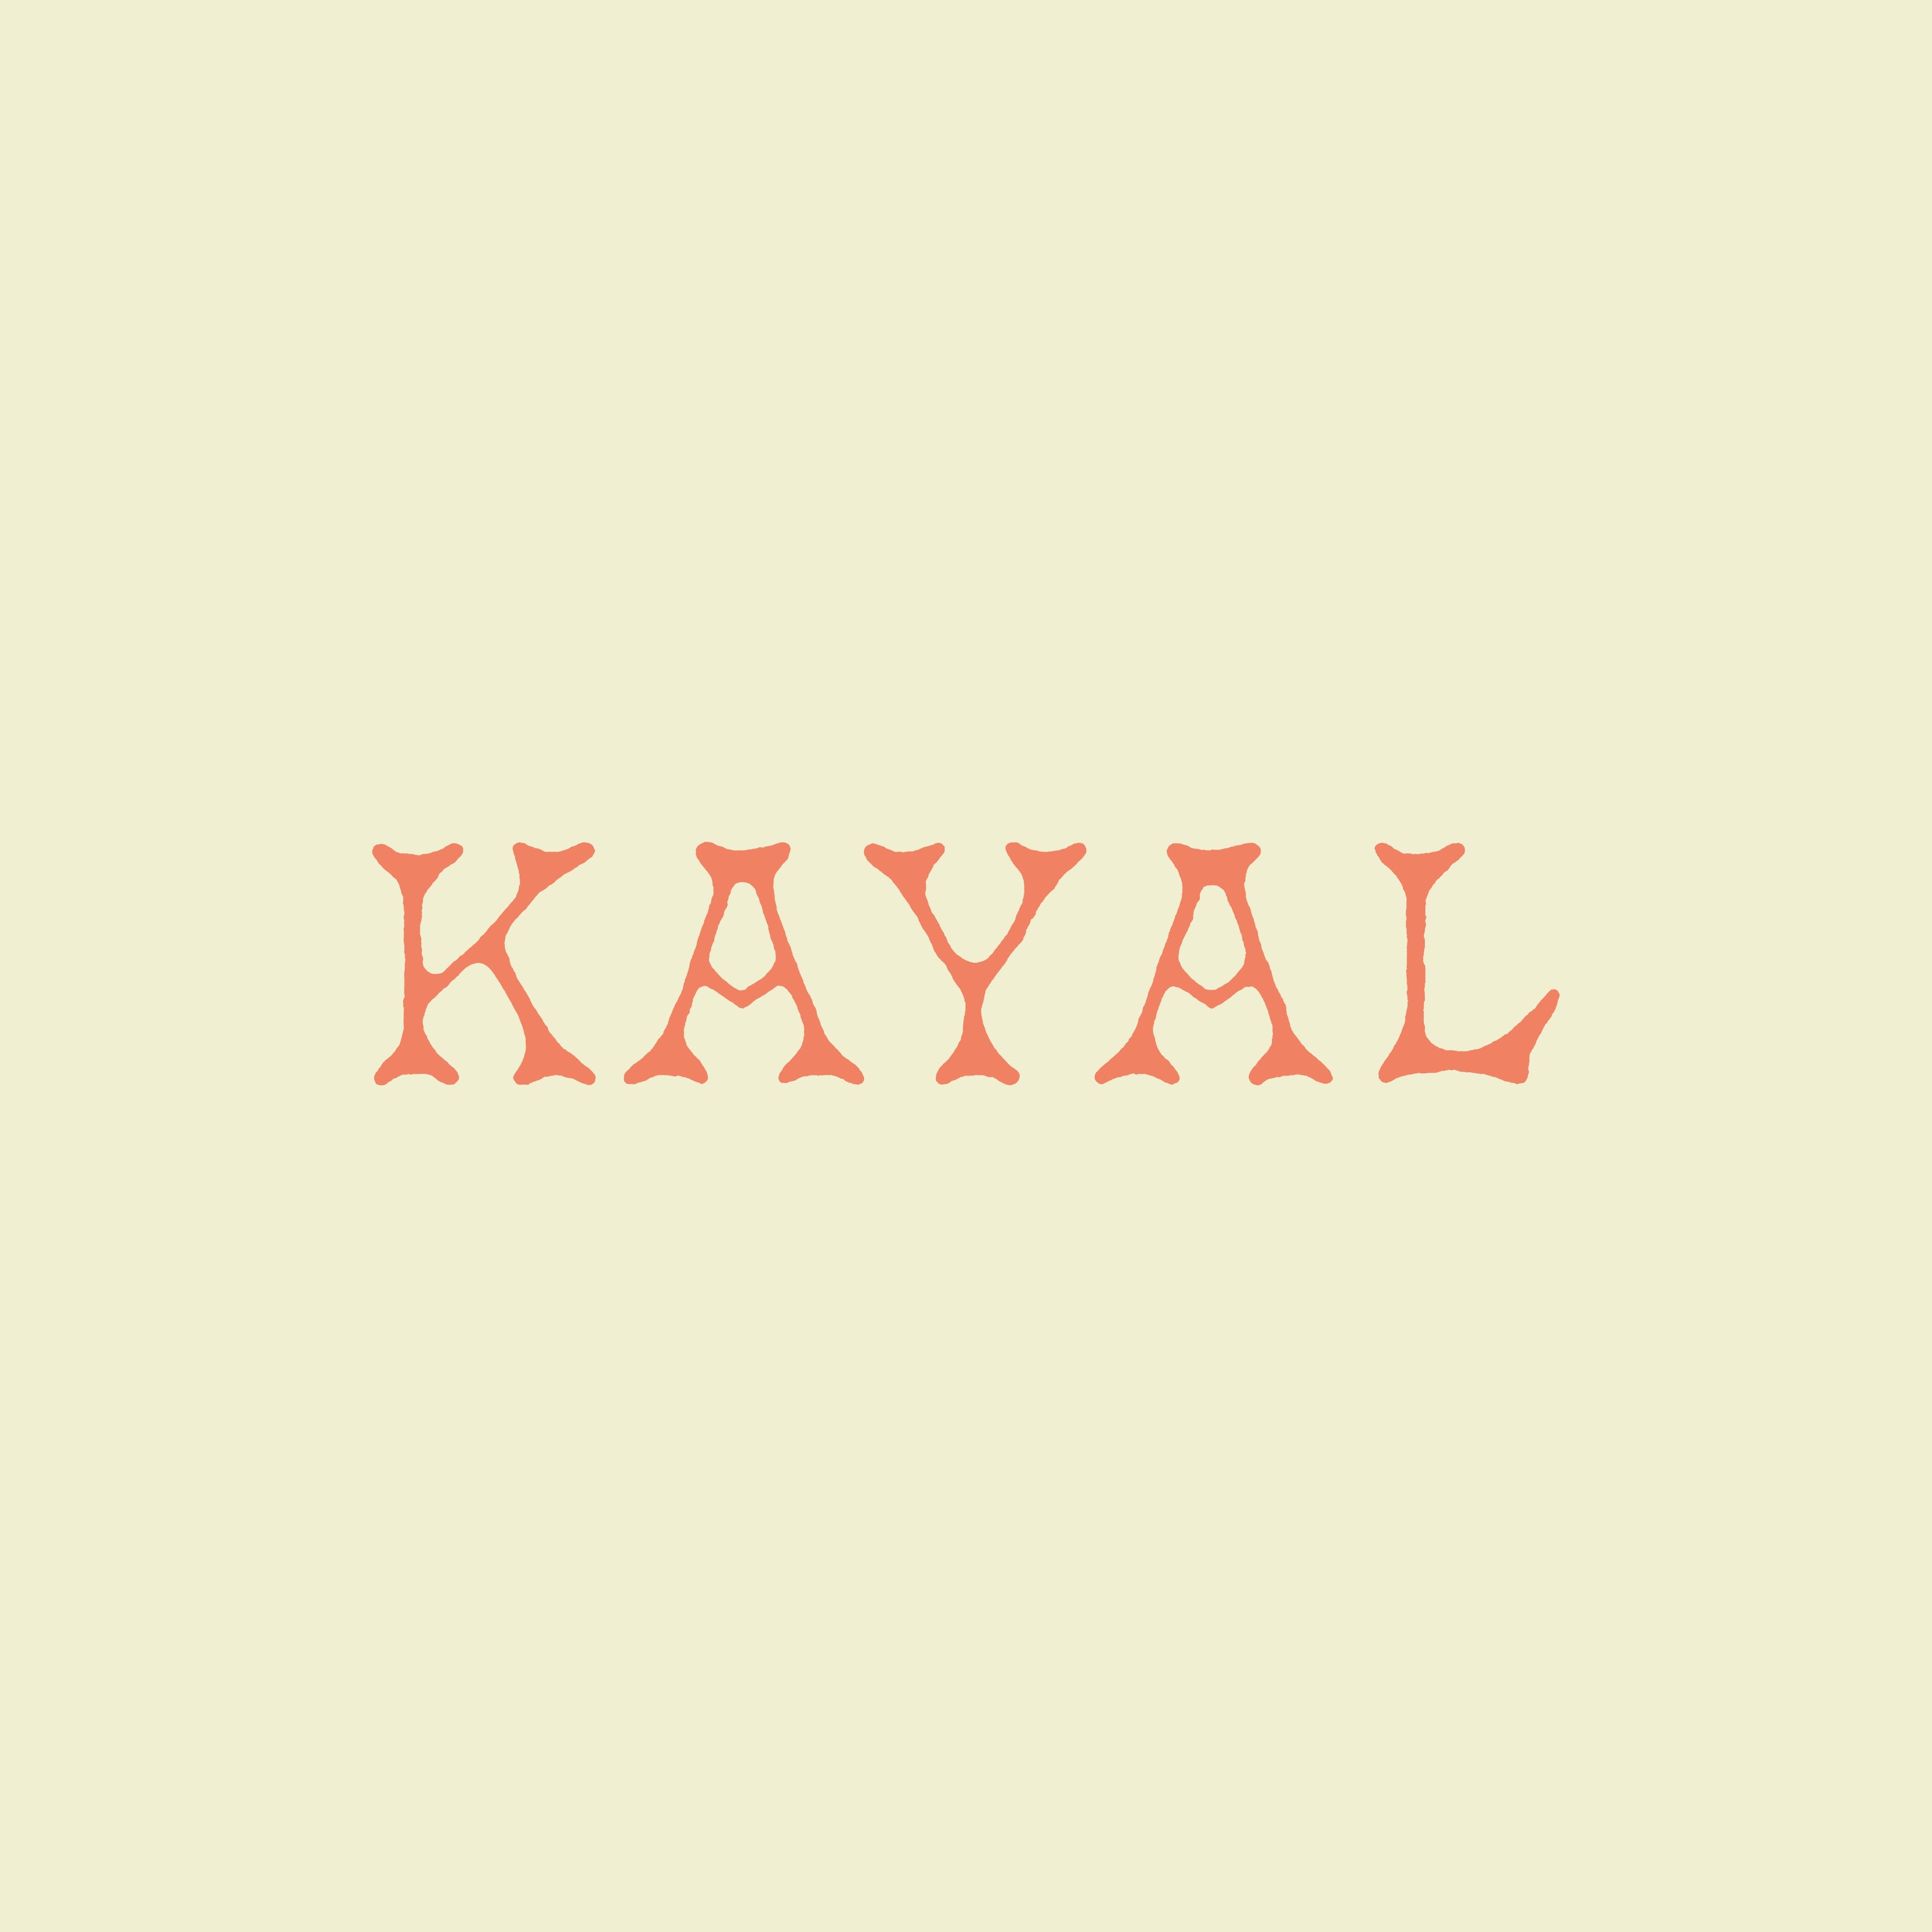 Concept store – KAYAL